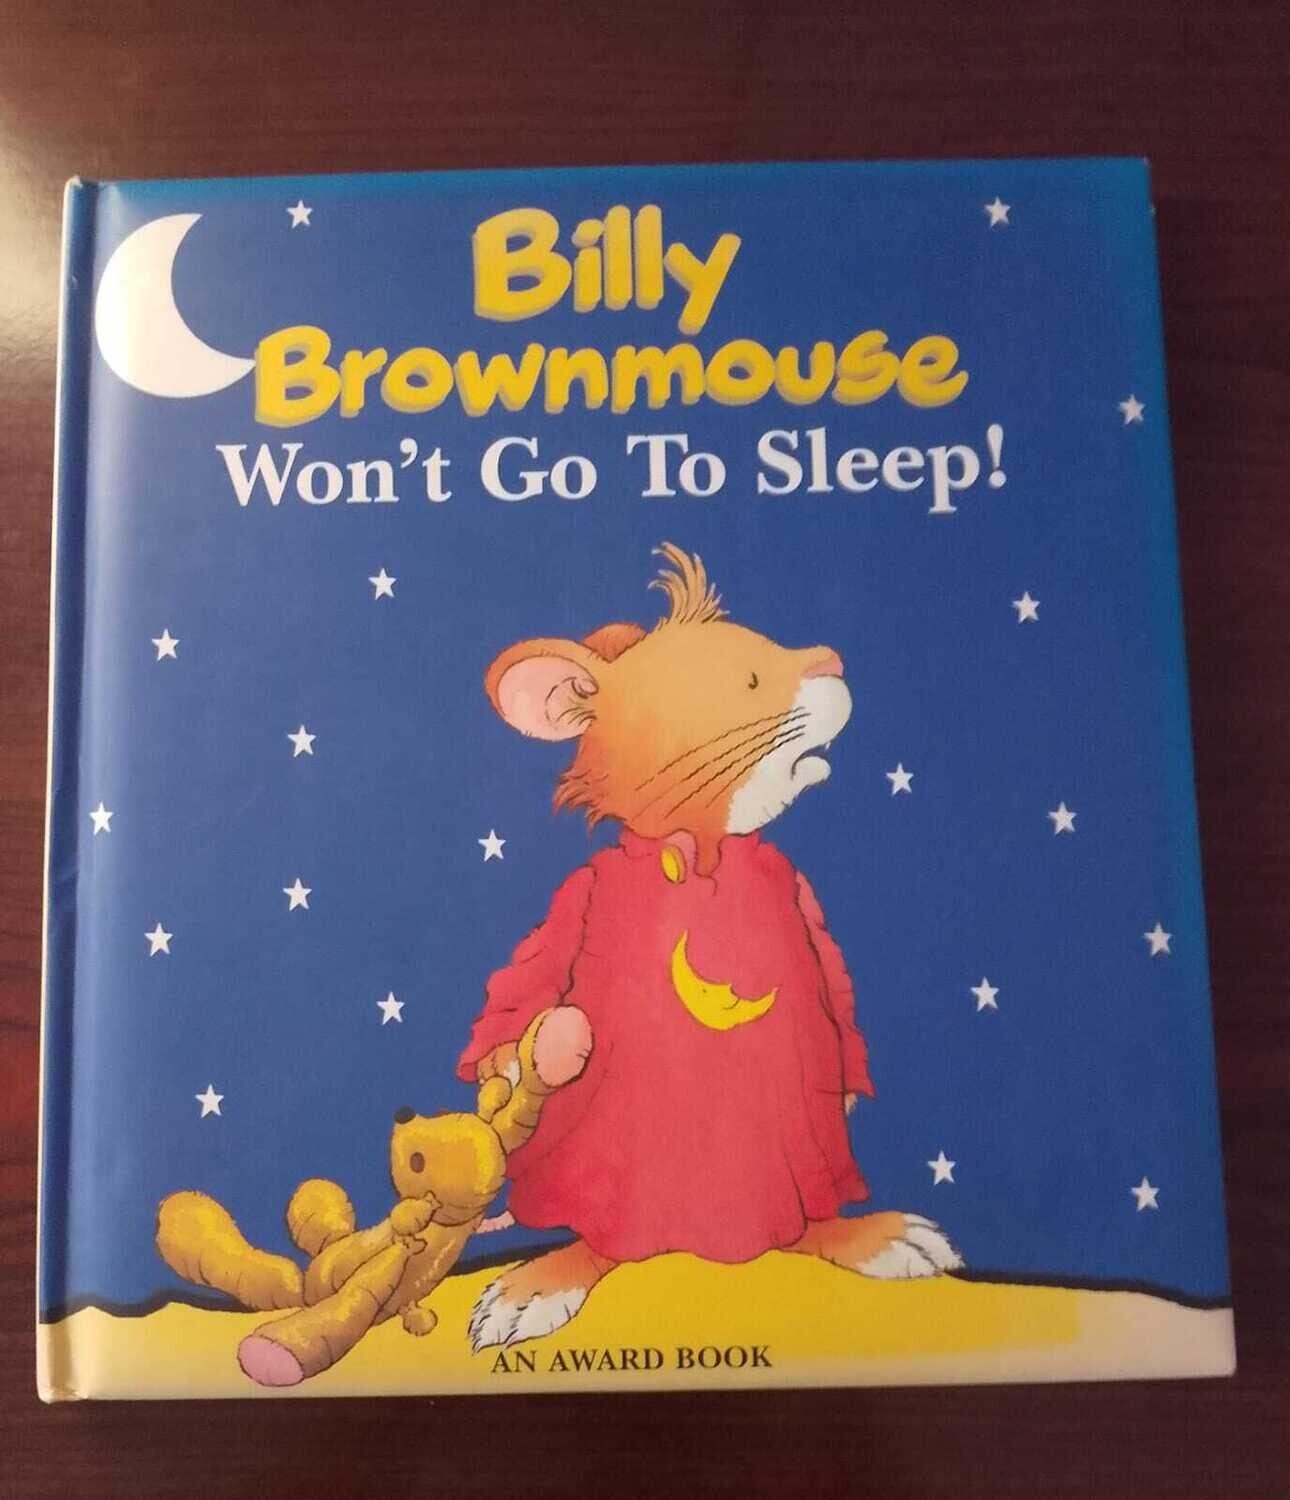 BILLY BROWNMOUSE WON'T GO TO SLEEP